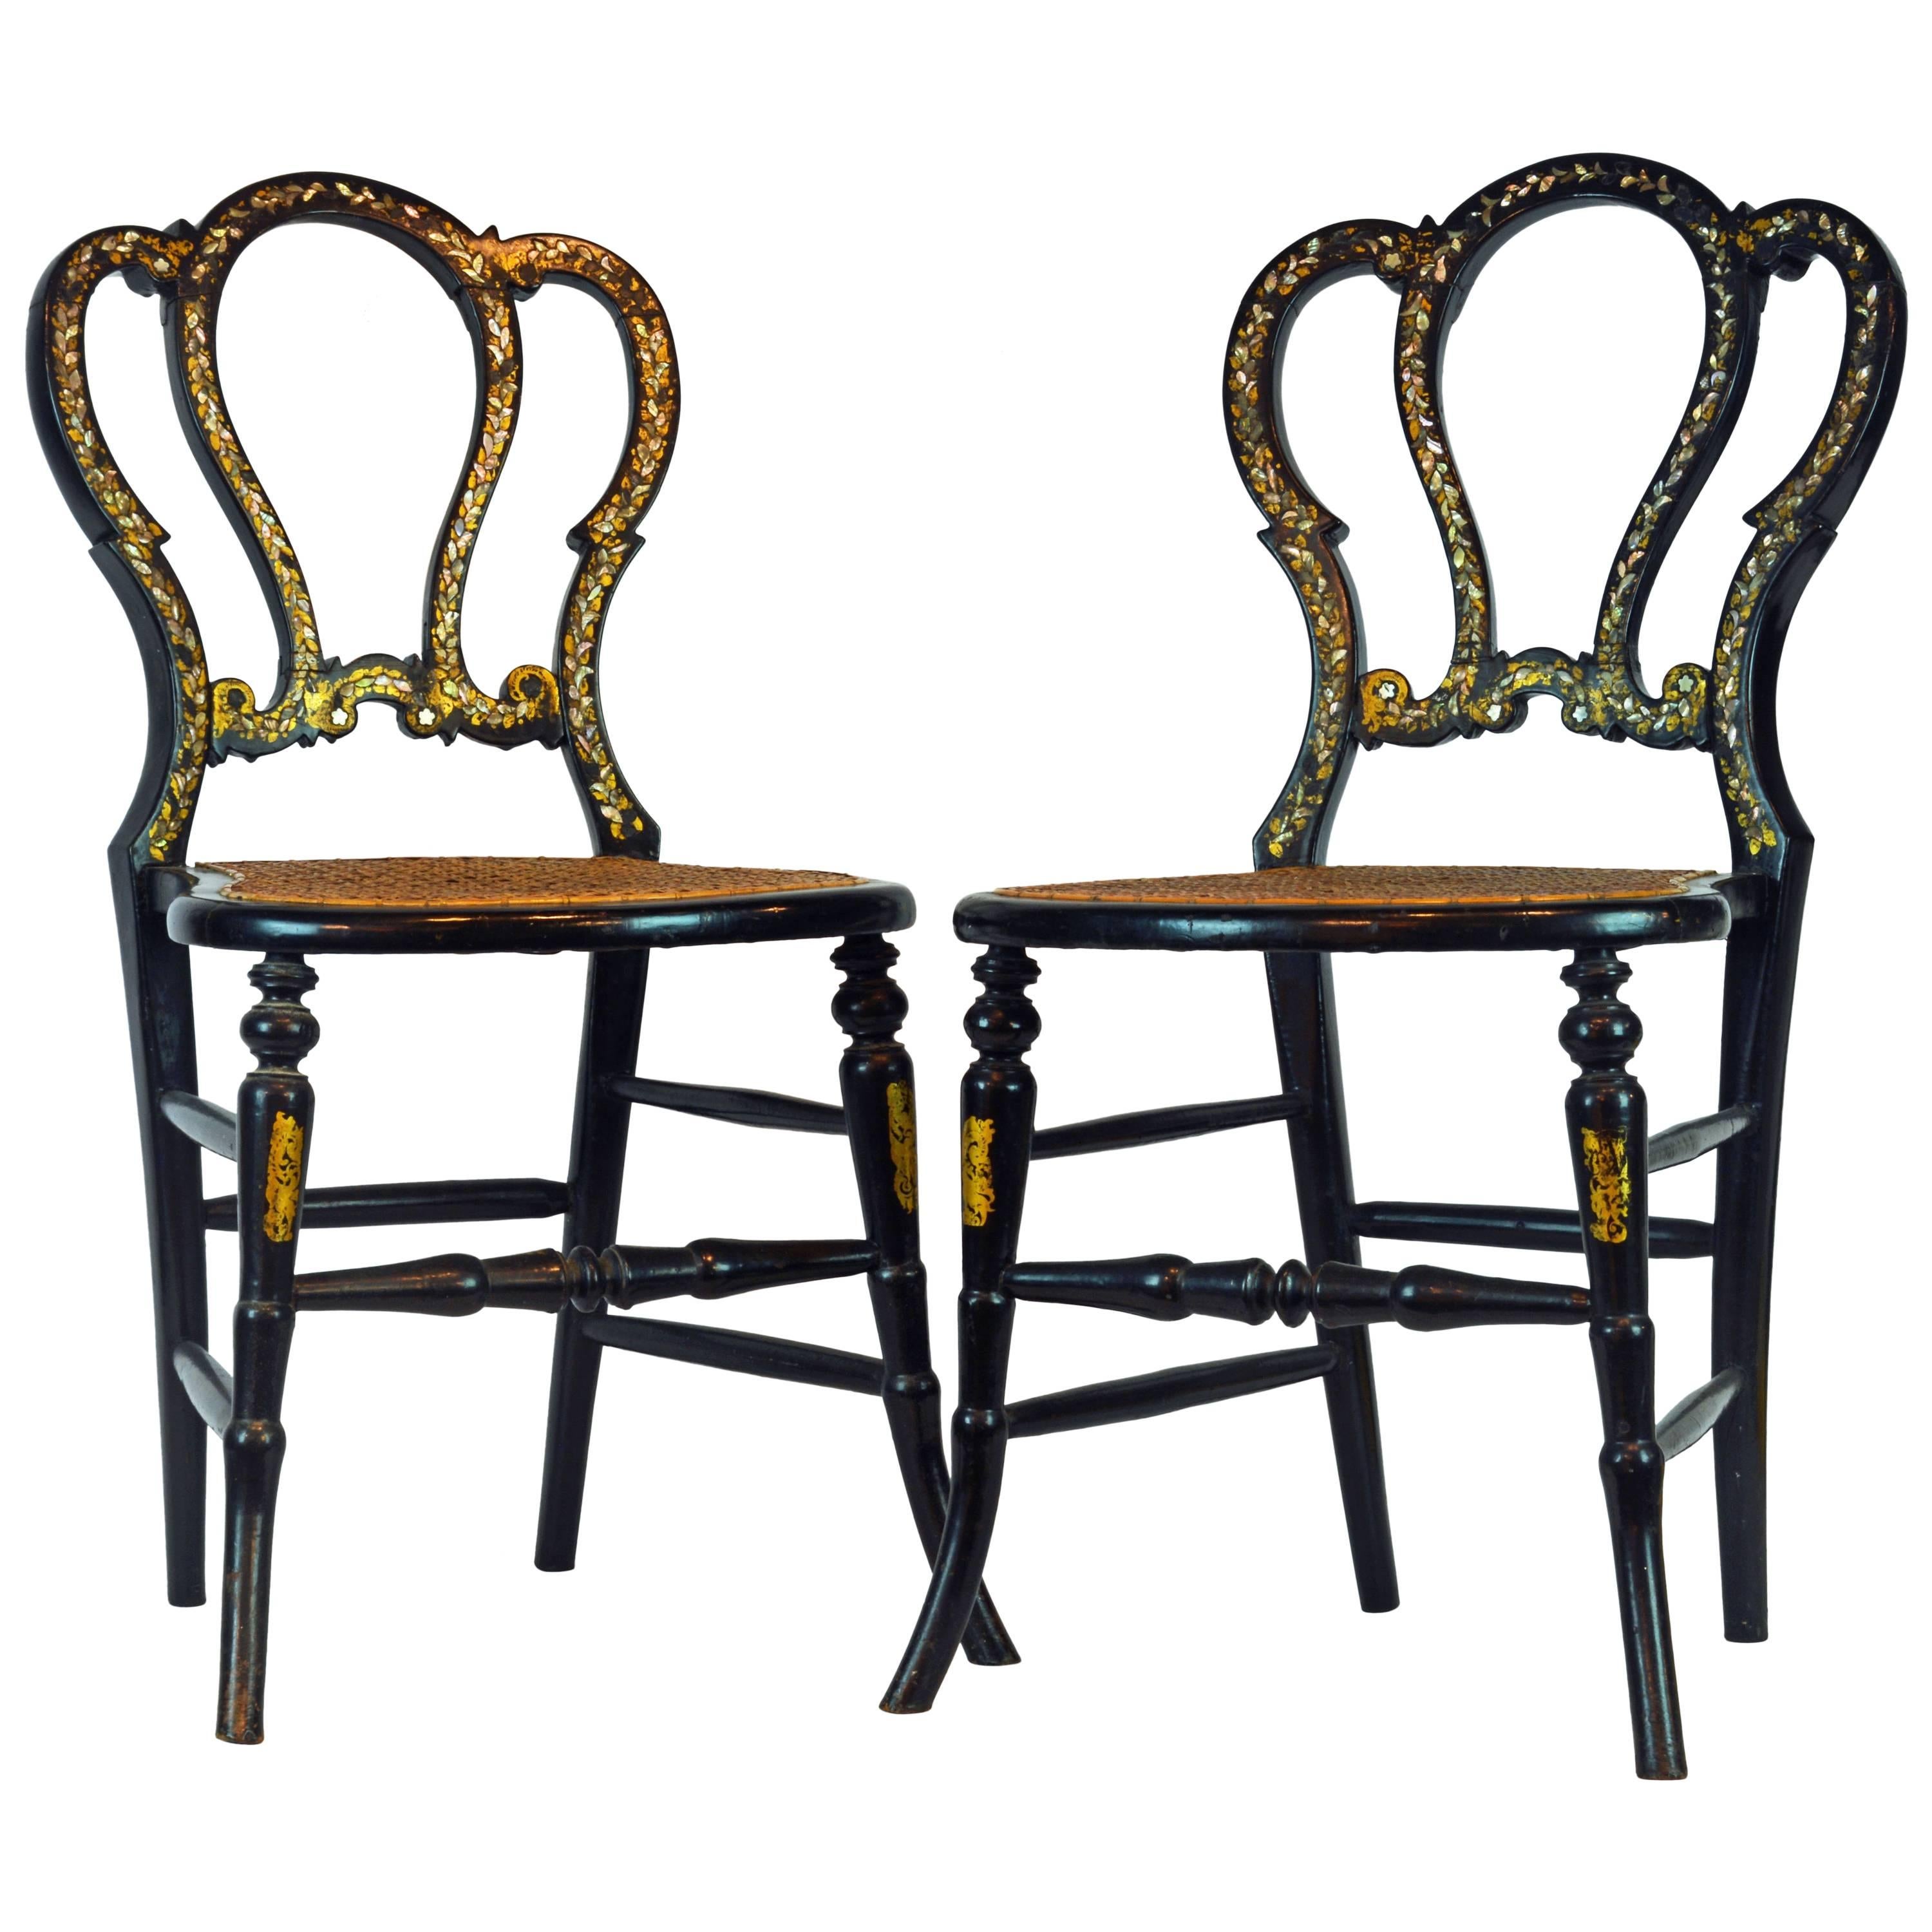 Pair of Lovely 19th Century Ebonized and Mother-of-Pearl Inlaid Bedroom Chairs